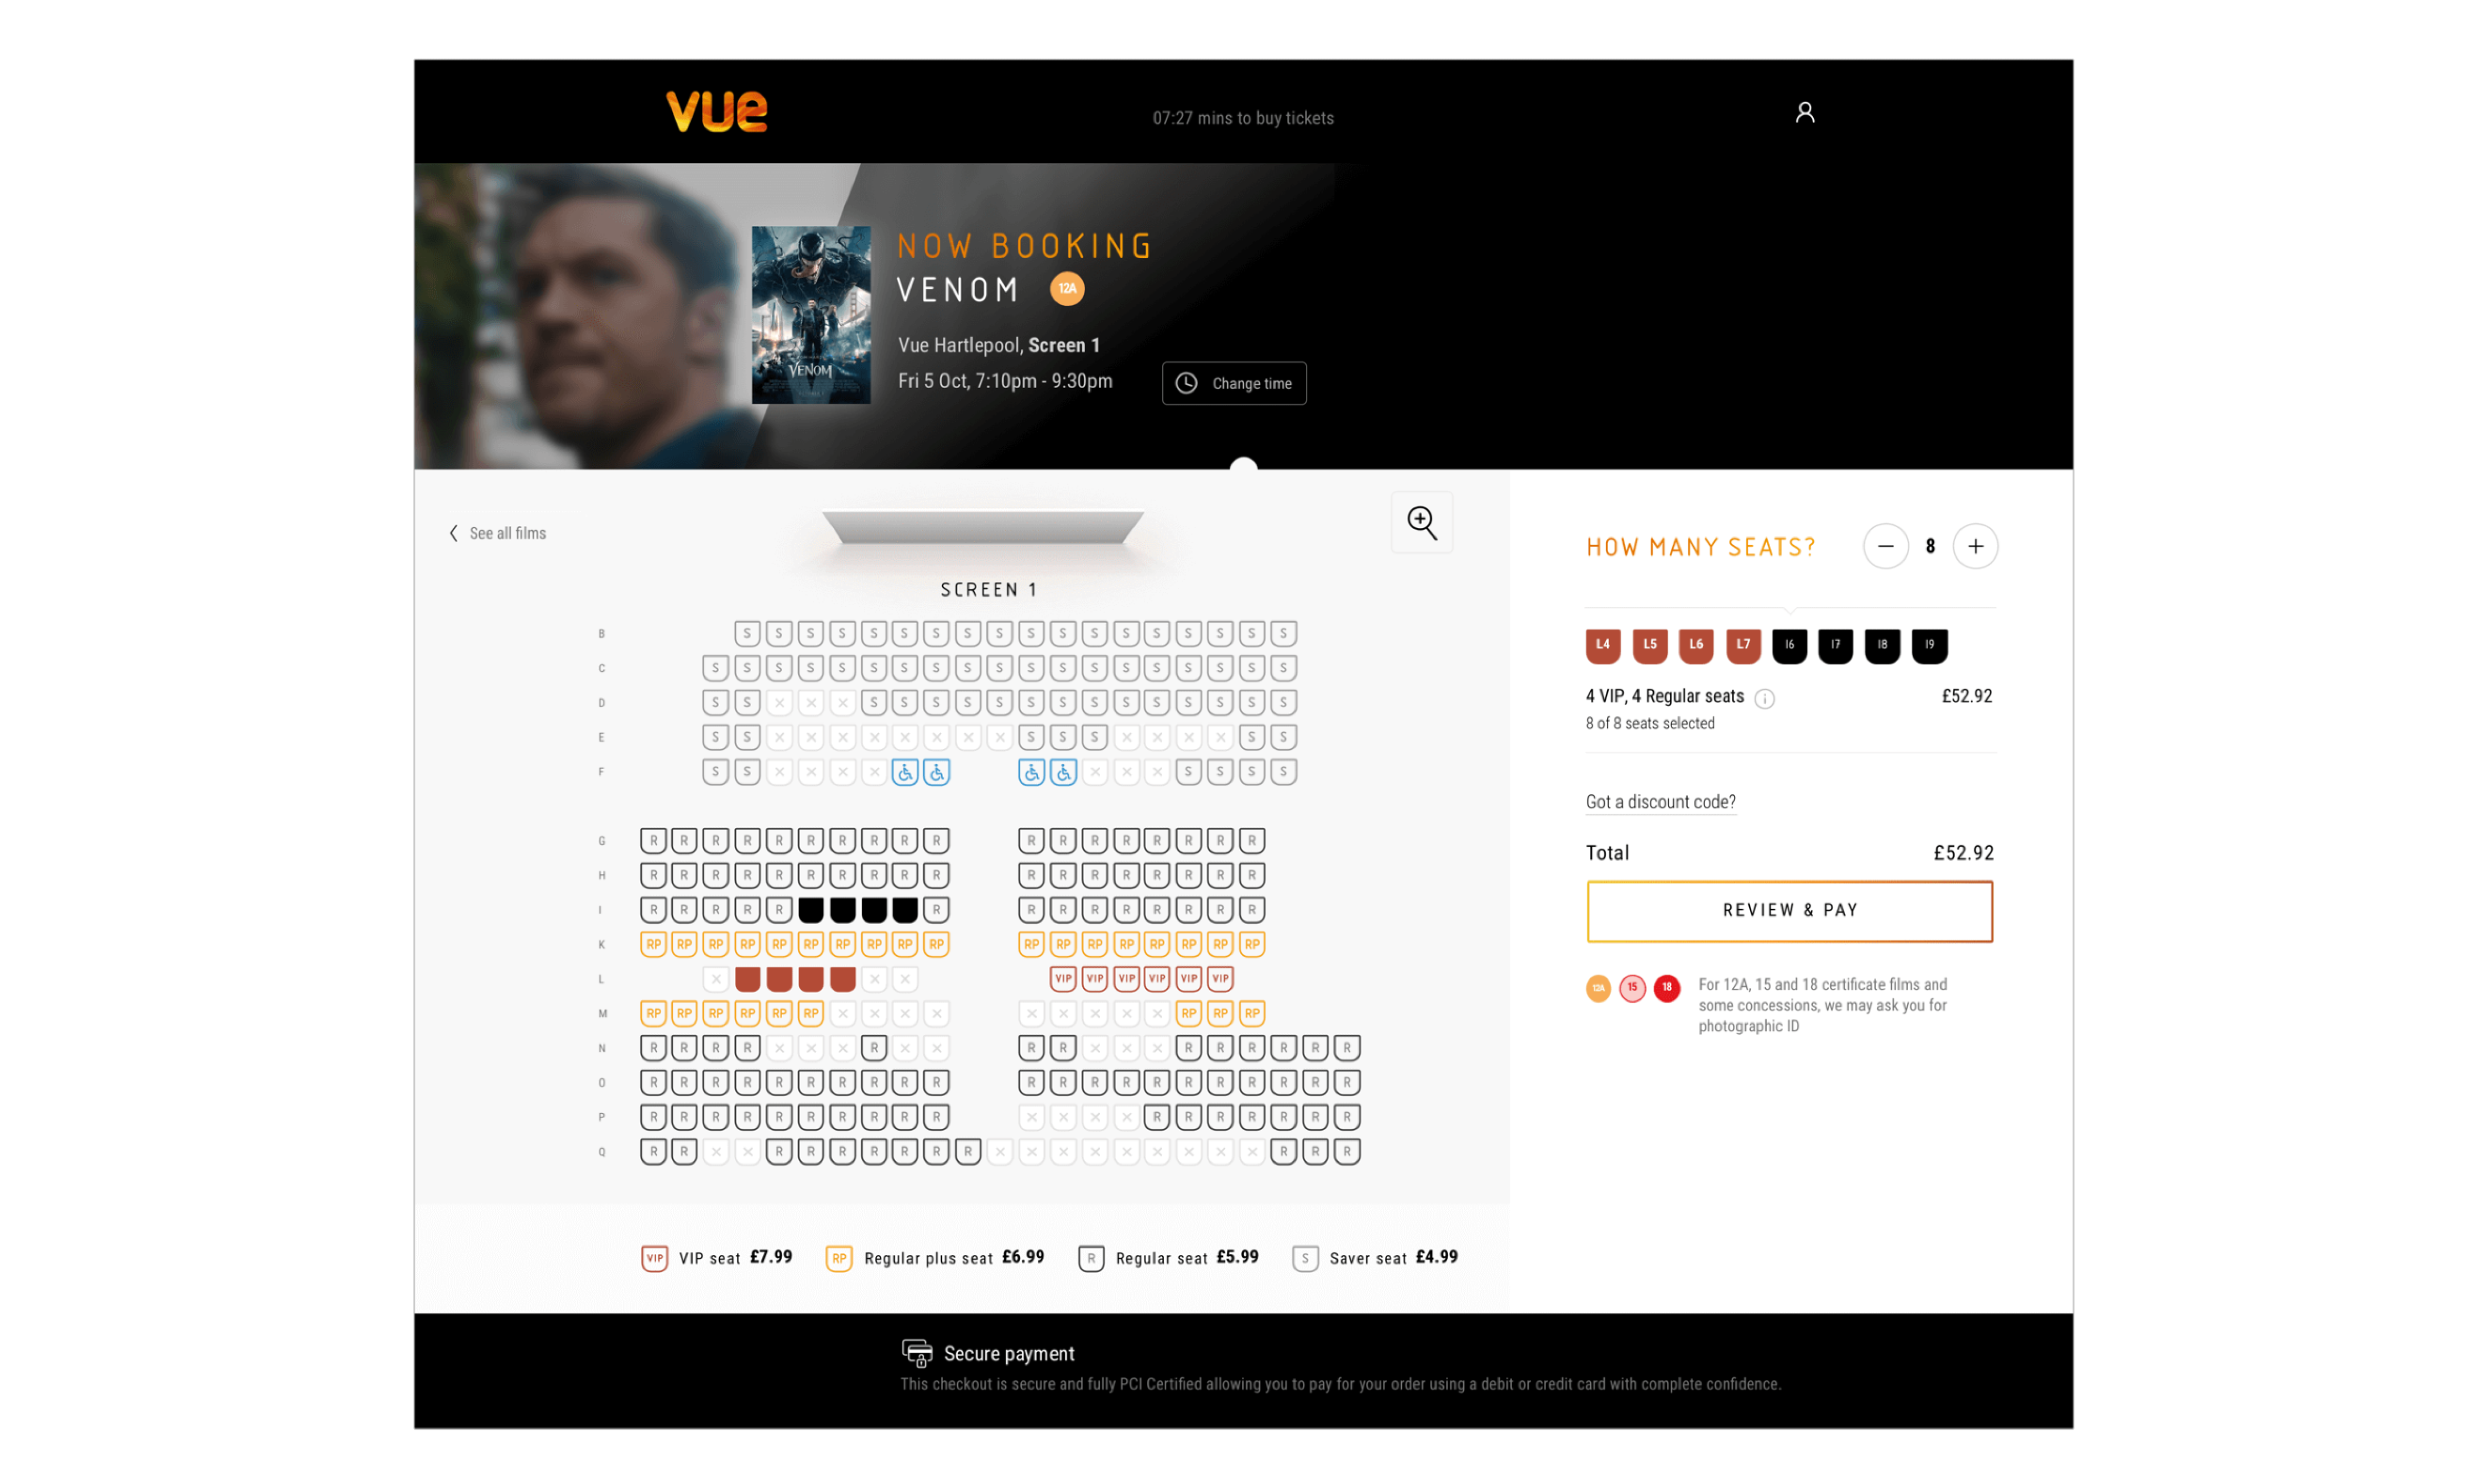 VUE select seat page